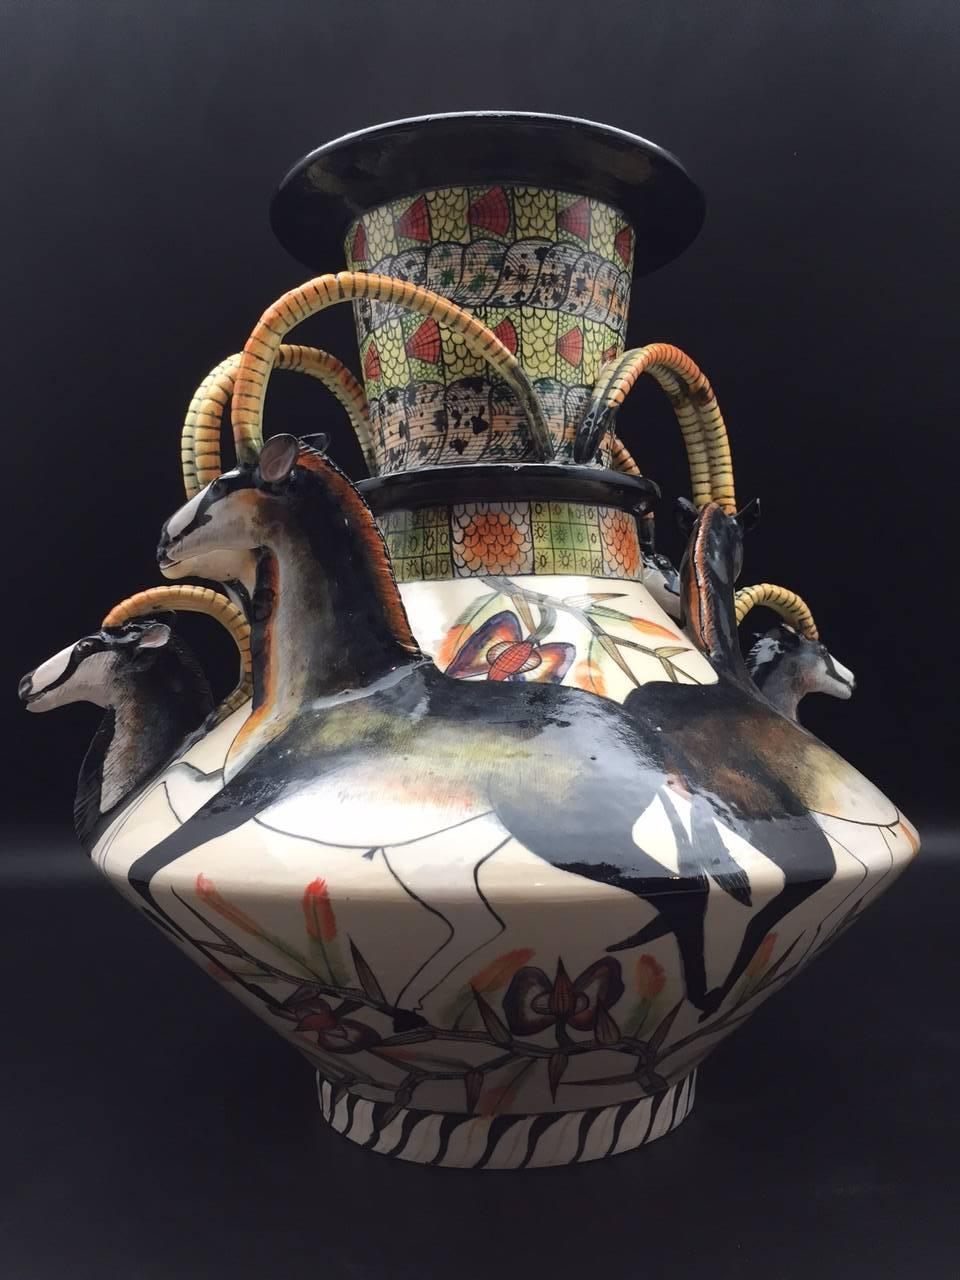 Sable vase, ceramic sculpture by Ardmore from South Africa. Sculpted by Sabelo Khoza and Sondelani Ntshalintshali, painted by Roux Gwala.

Ardmore ceramic art was established by Fée Halsted and is situated in the foothills of the Drakensberg